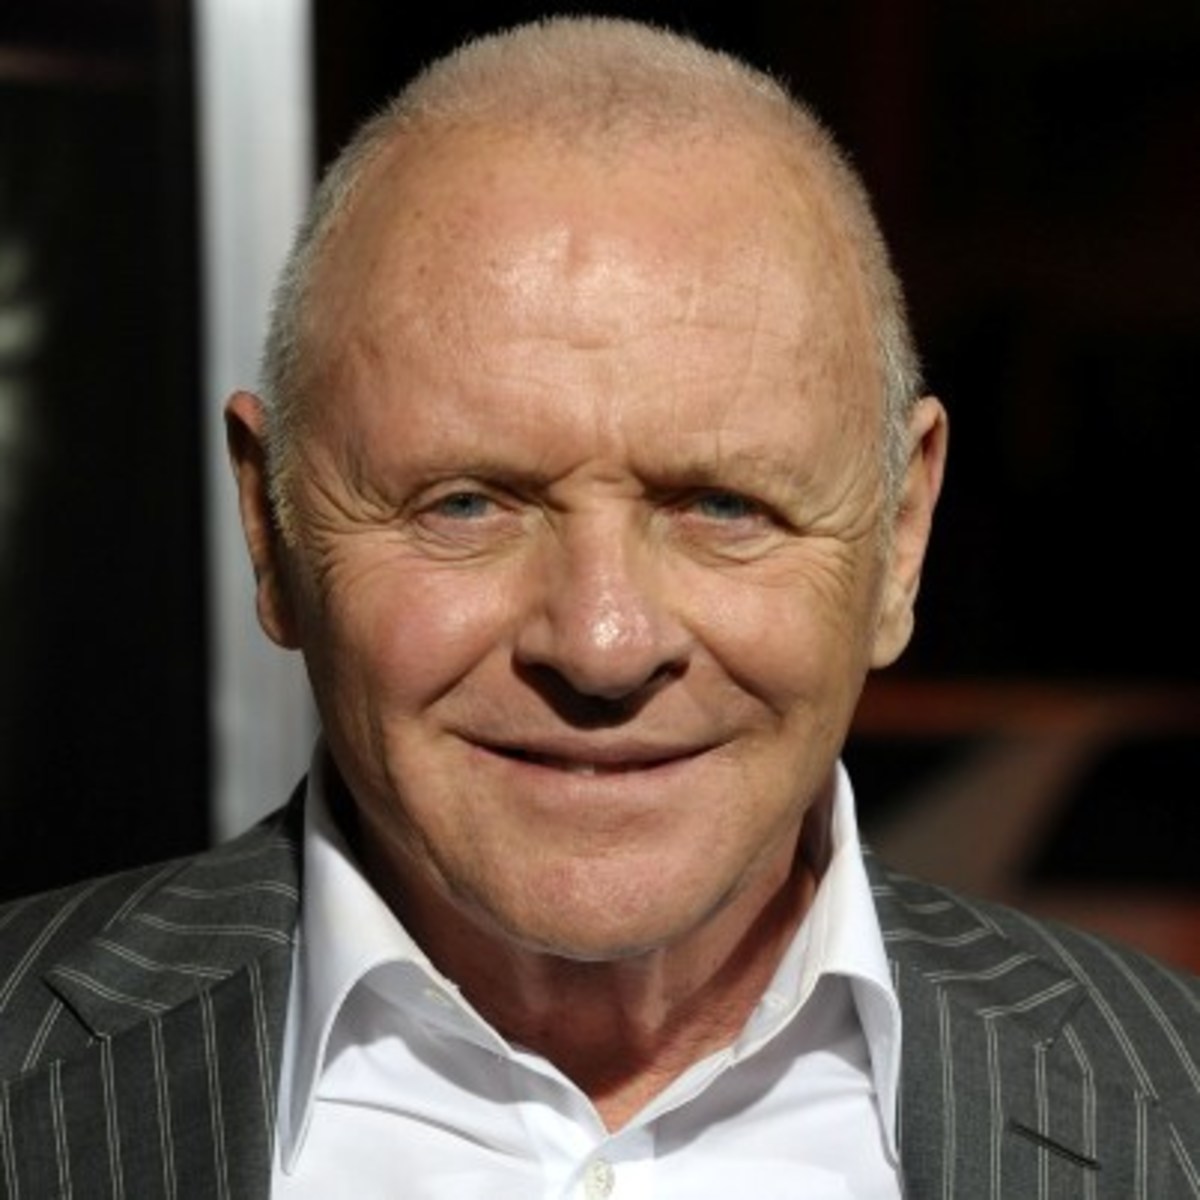 How tall is Anthony Hopkins?